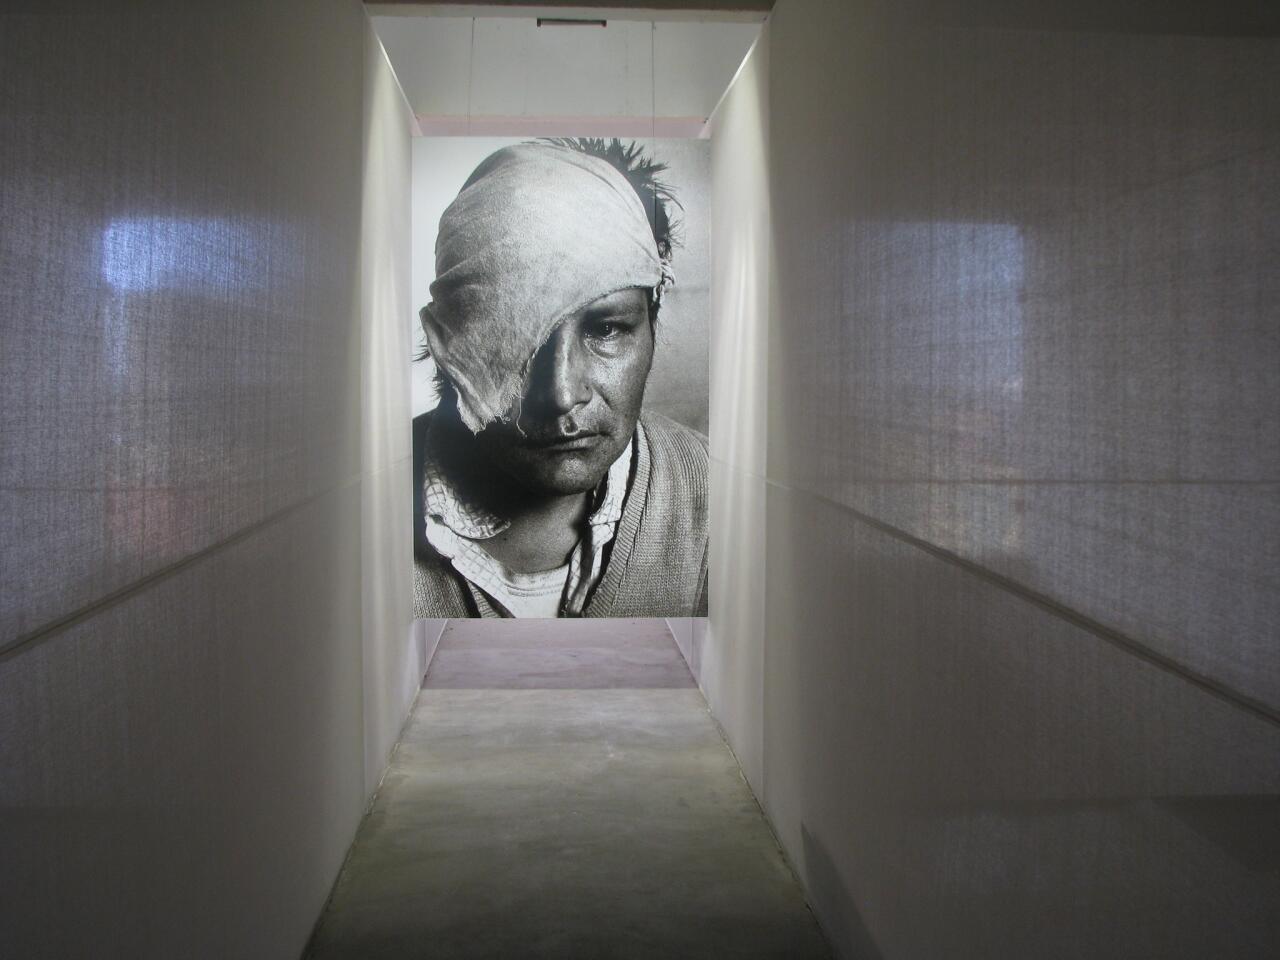 The simple, gut-wrenching entrance to an exhibition that commemorated the nearly 70,000 lives claimed by Peru's internal conflict in the '80s and '90s. The image is from a visit I made to the site in 2009.